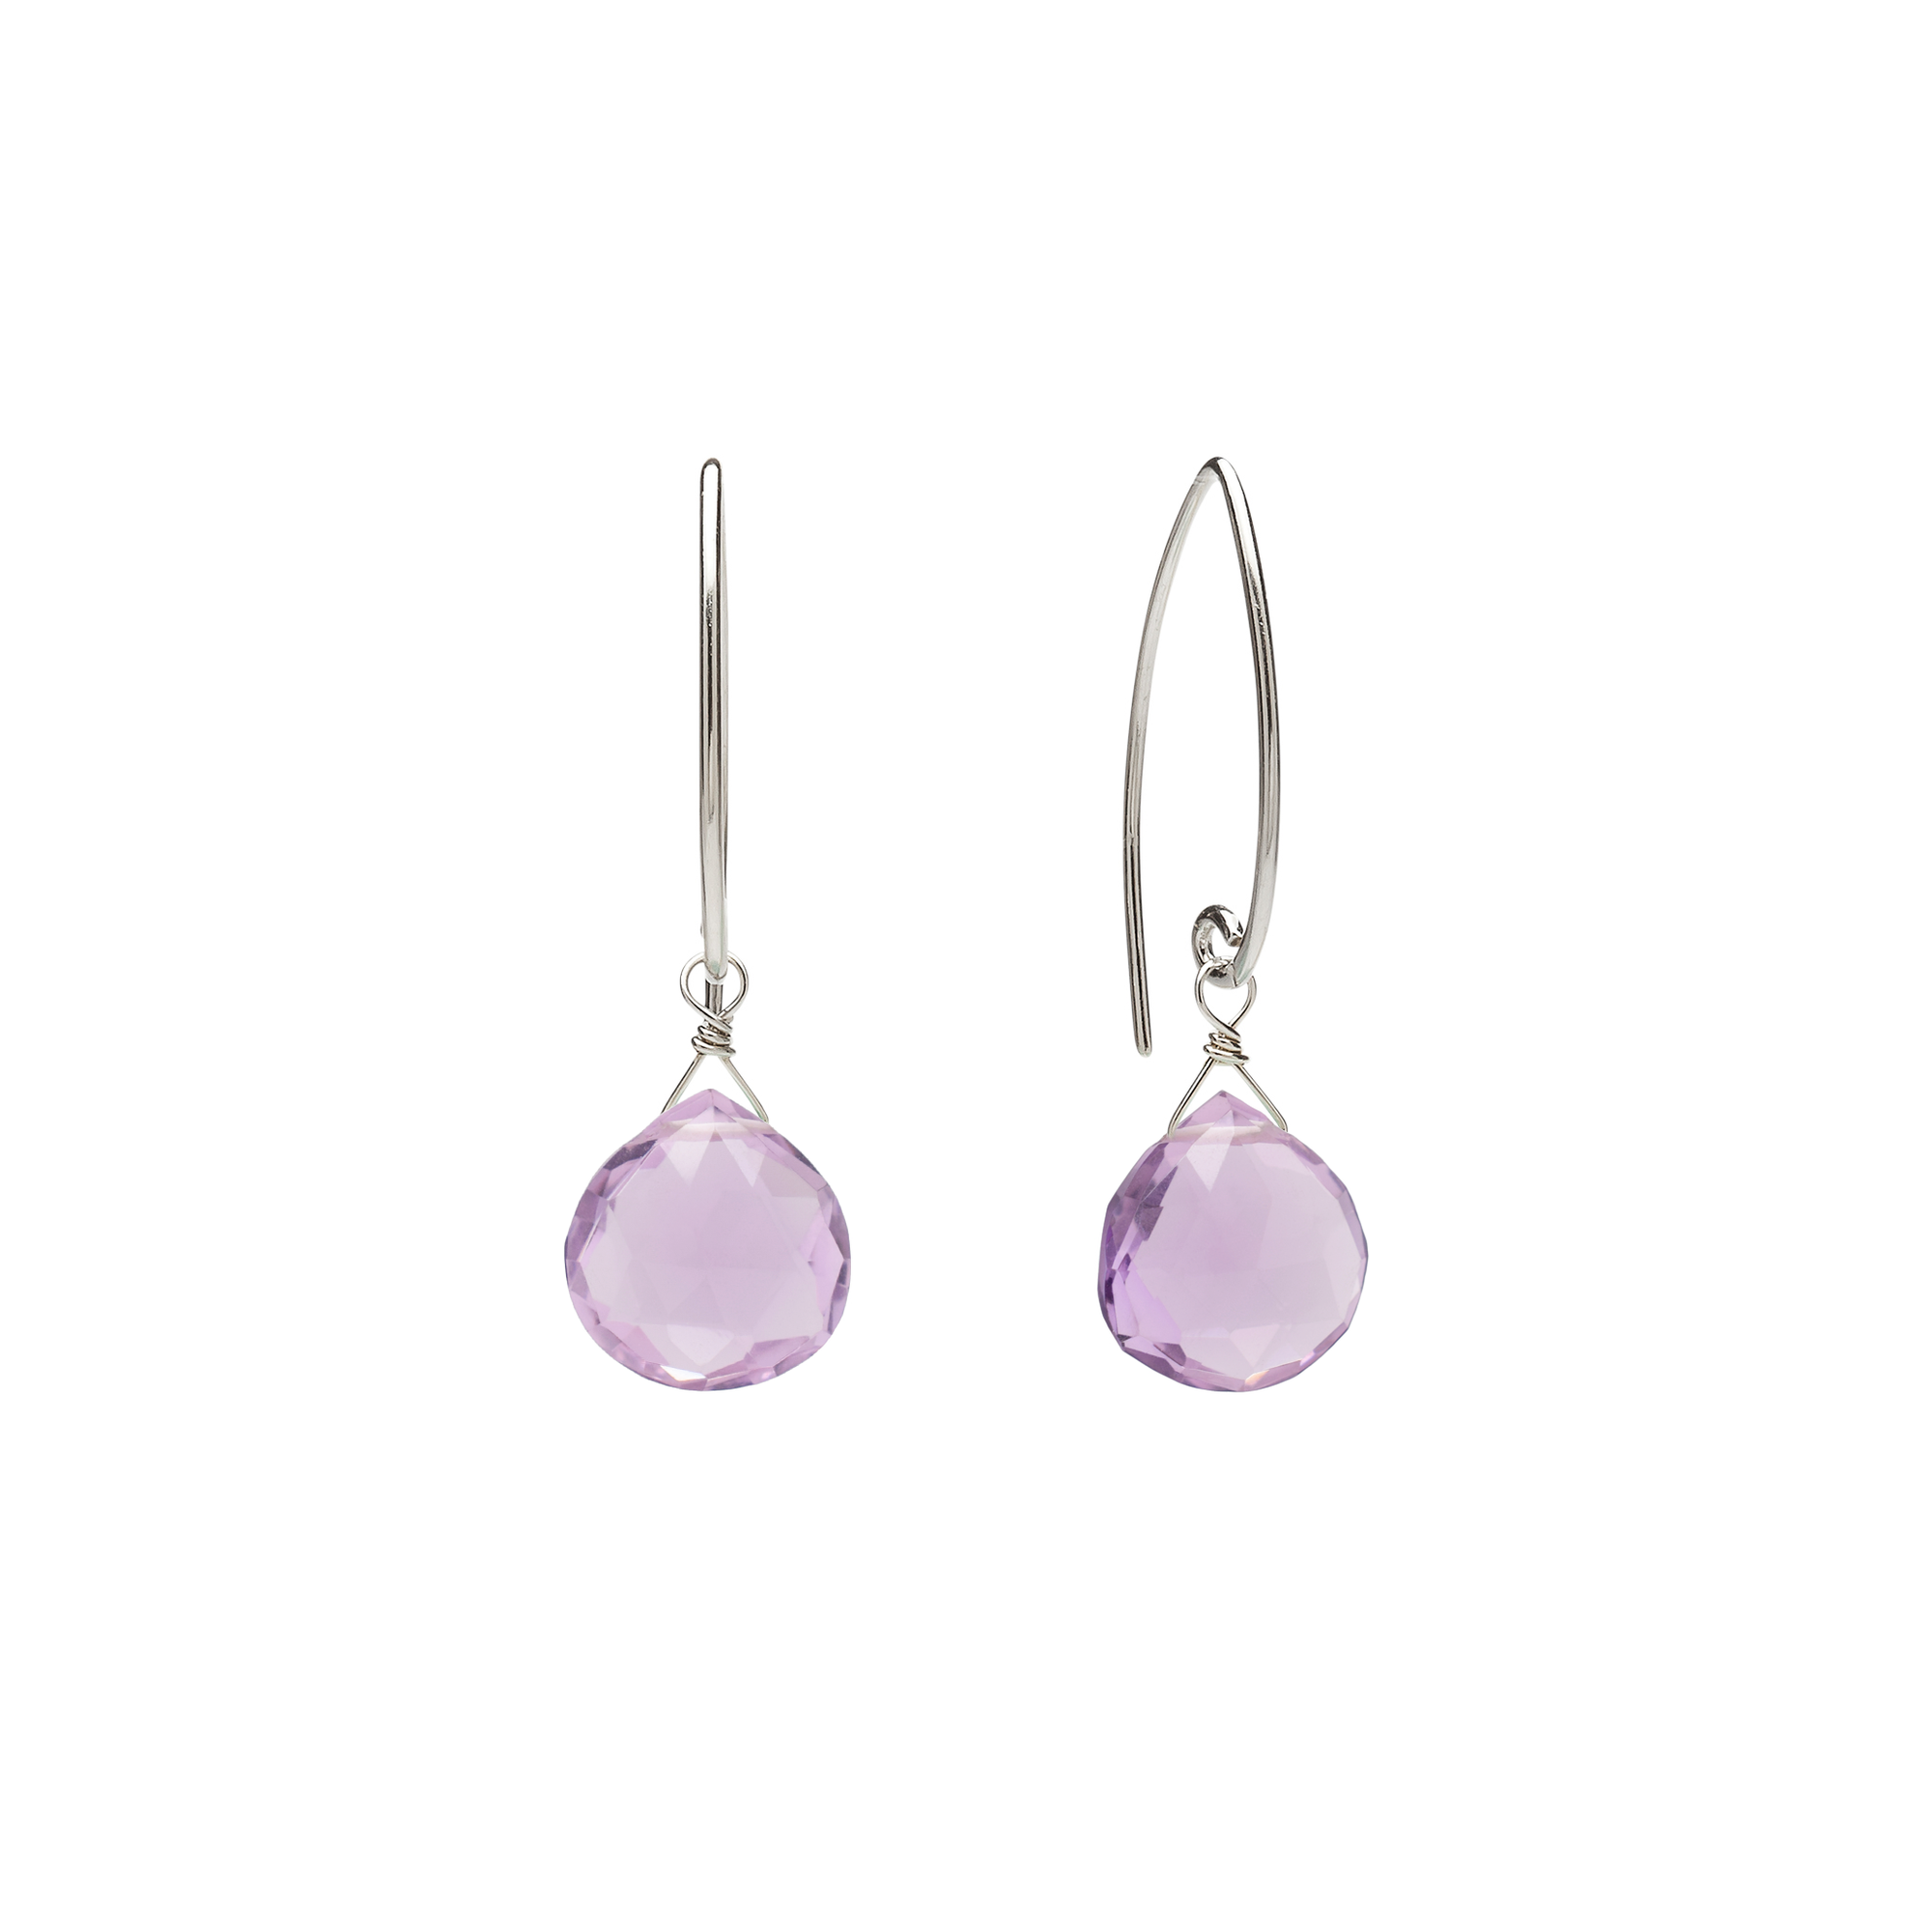 Image of silver dangle earrings with pink amethyst gemstone on white background